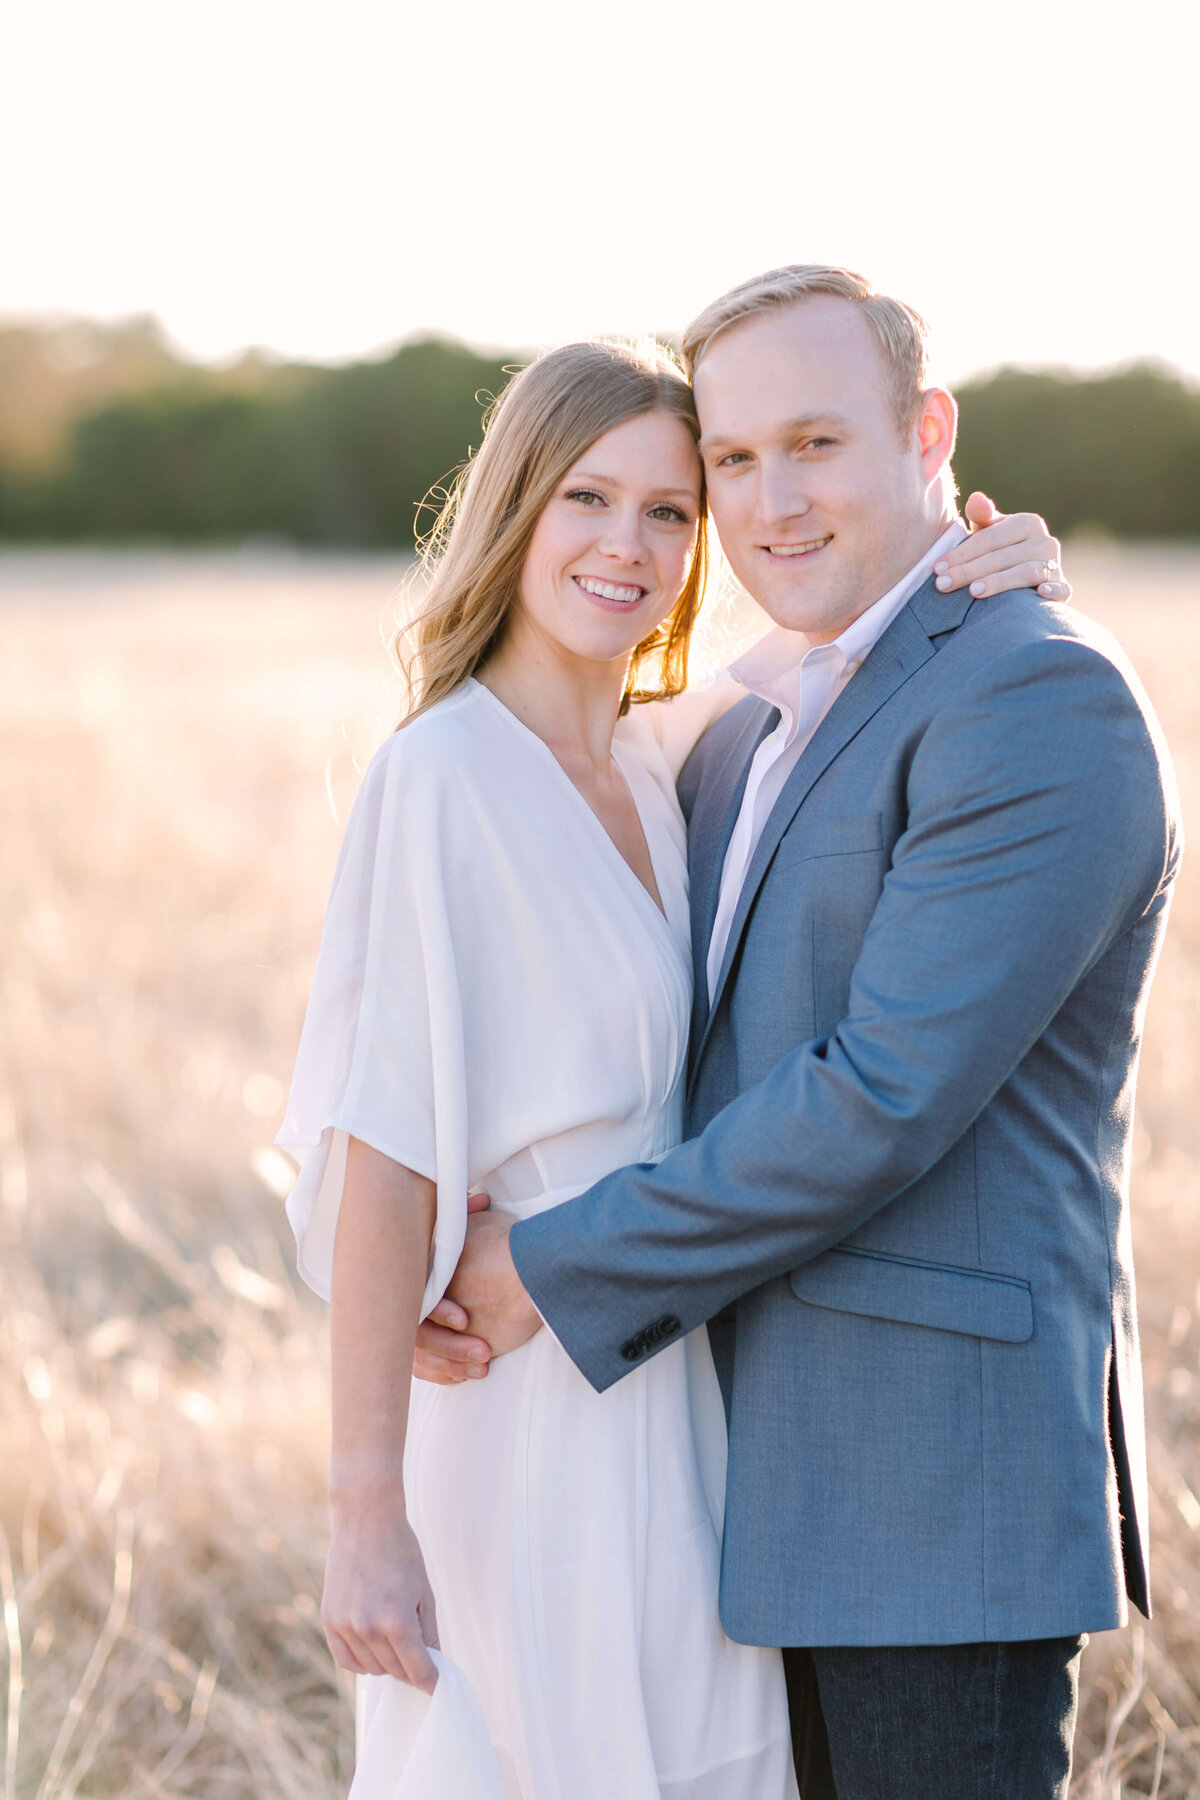 Golden hour engagement session at Brushy Creek